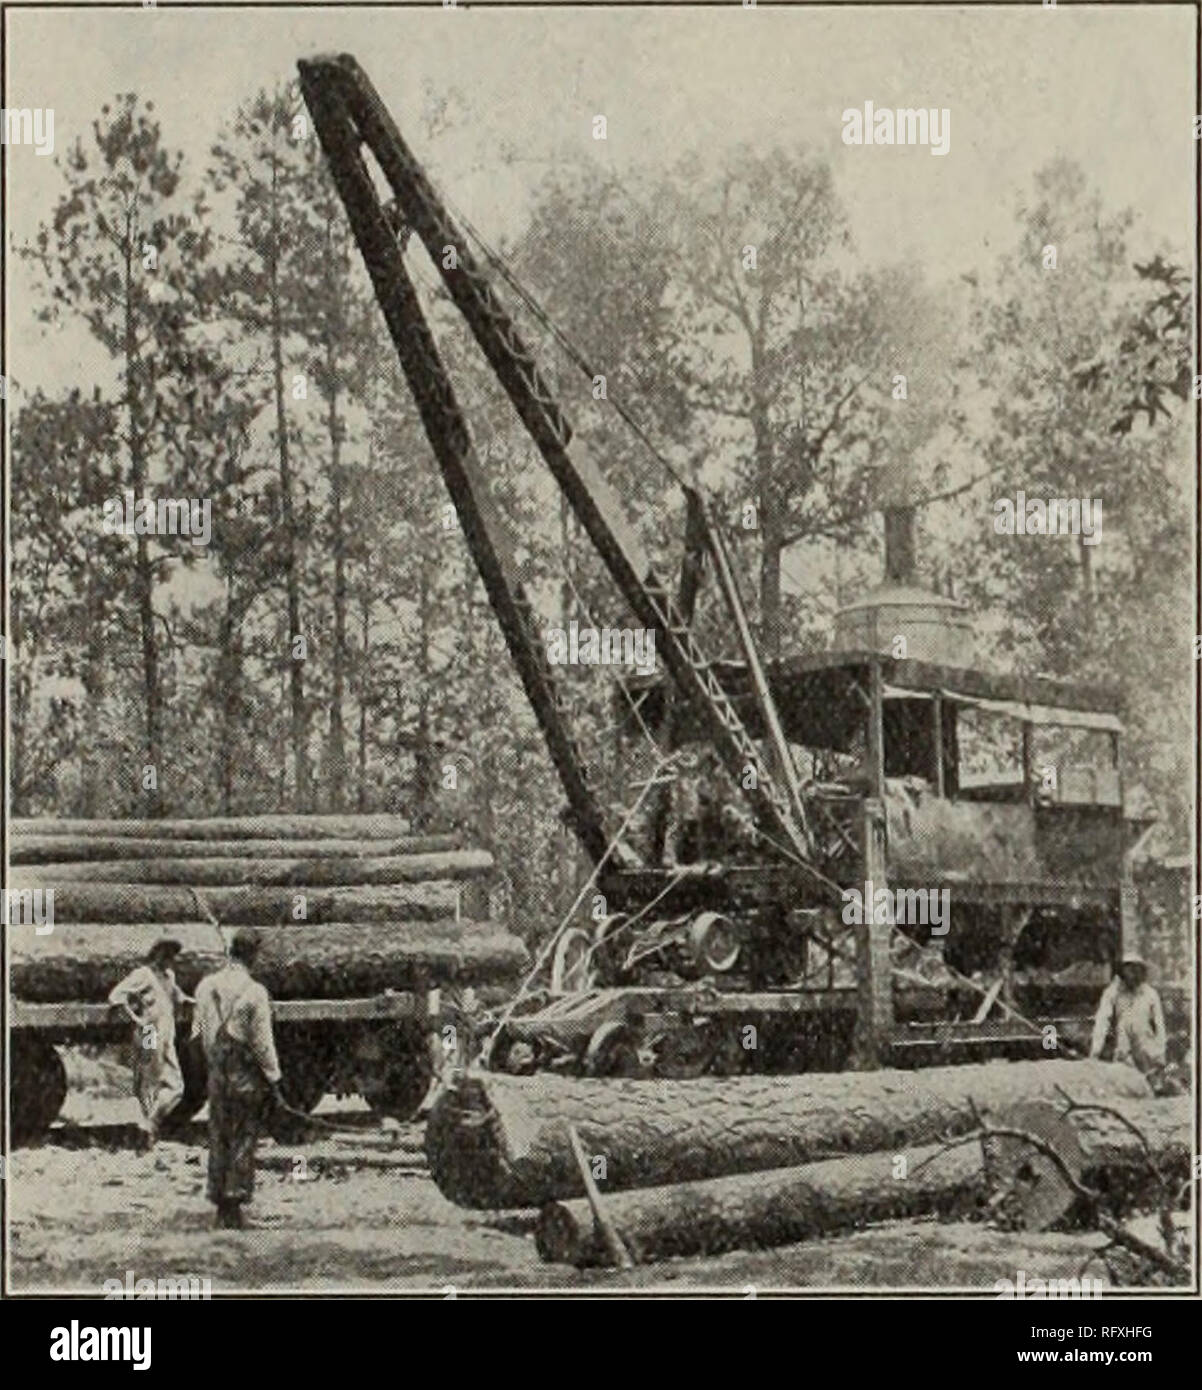 . Canadian forest industries July-December 1912. Lumbering; Forests and forestry; Forest products; Wood-pulp industry; Wood-using industries. 68 CANADA LUMBERMAN AND WOODWORKER CURRENT LUMBER PRICES Continued No. 2 Cuts 6/4 45 00 No. 2 Cuts 8/4 60 00 No. S Cuts 5/4 33 00 No. 8 Cuts G/4 34 (X) No. 3 Cuts 8/4 36 00 Dressing 5/4 46 00 Dressing 5/4 x 10 51 00 Dressing 5/4 x 12 52 00 No. 1 Moulding 5/4 58 00 No. 1 Moulding 6/4 68 00 No. 1 Moulding 8/4 58 00 No. 2 Moulding 5/4 47 00 No. 2 Moulding 6/4 47 0&quot; No. 2 Moulding 8/4 47 00 No. 1 Barn 1 x 12 46 00 No. 1 Barn 1x6 and 8 34 00 No. 1 Barn 1 Stock Photo